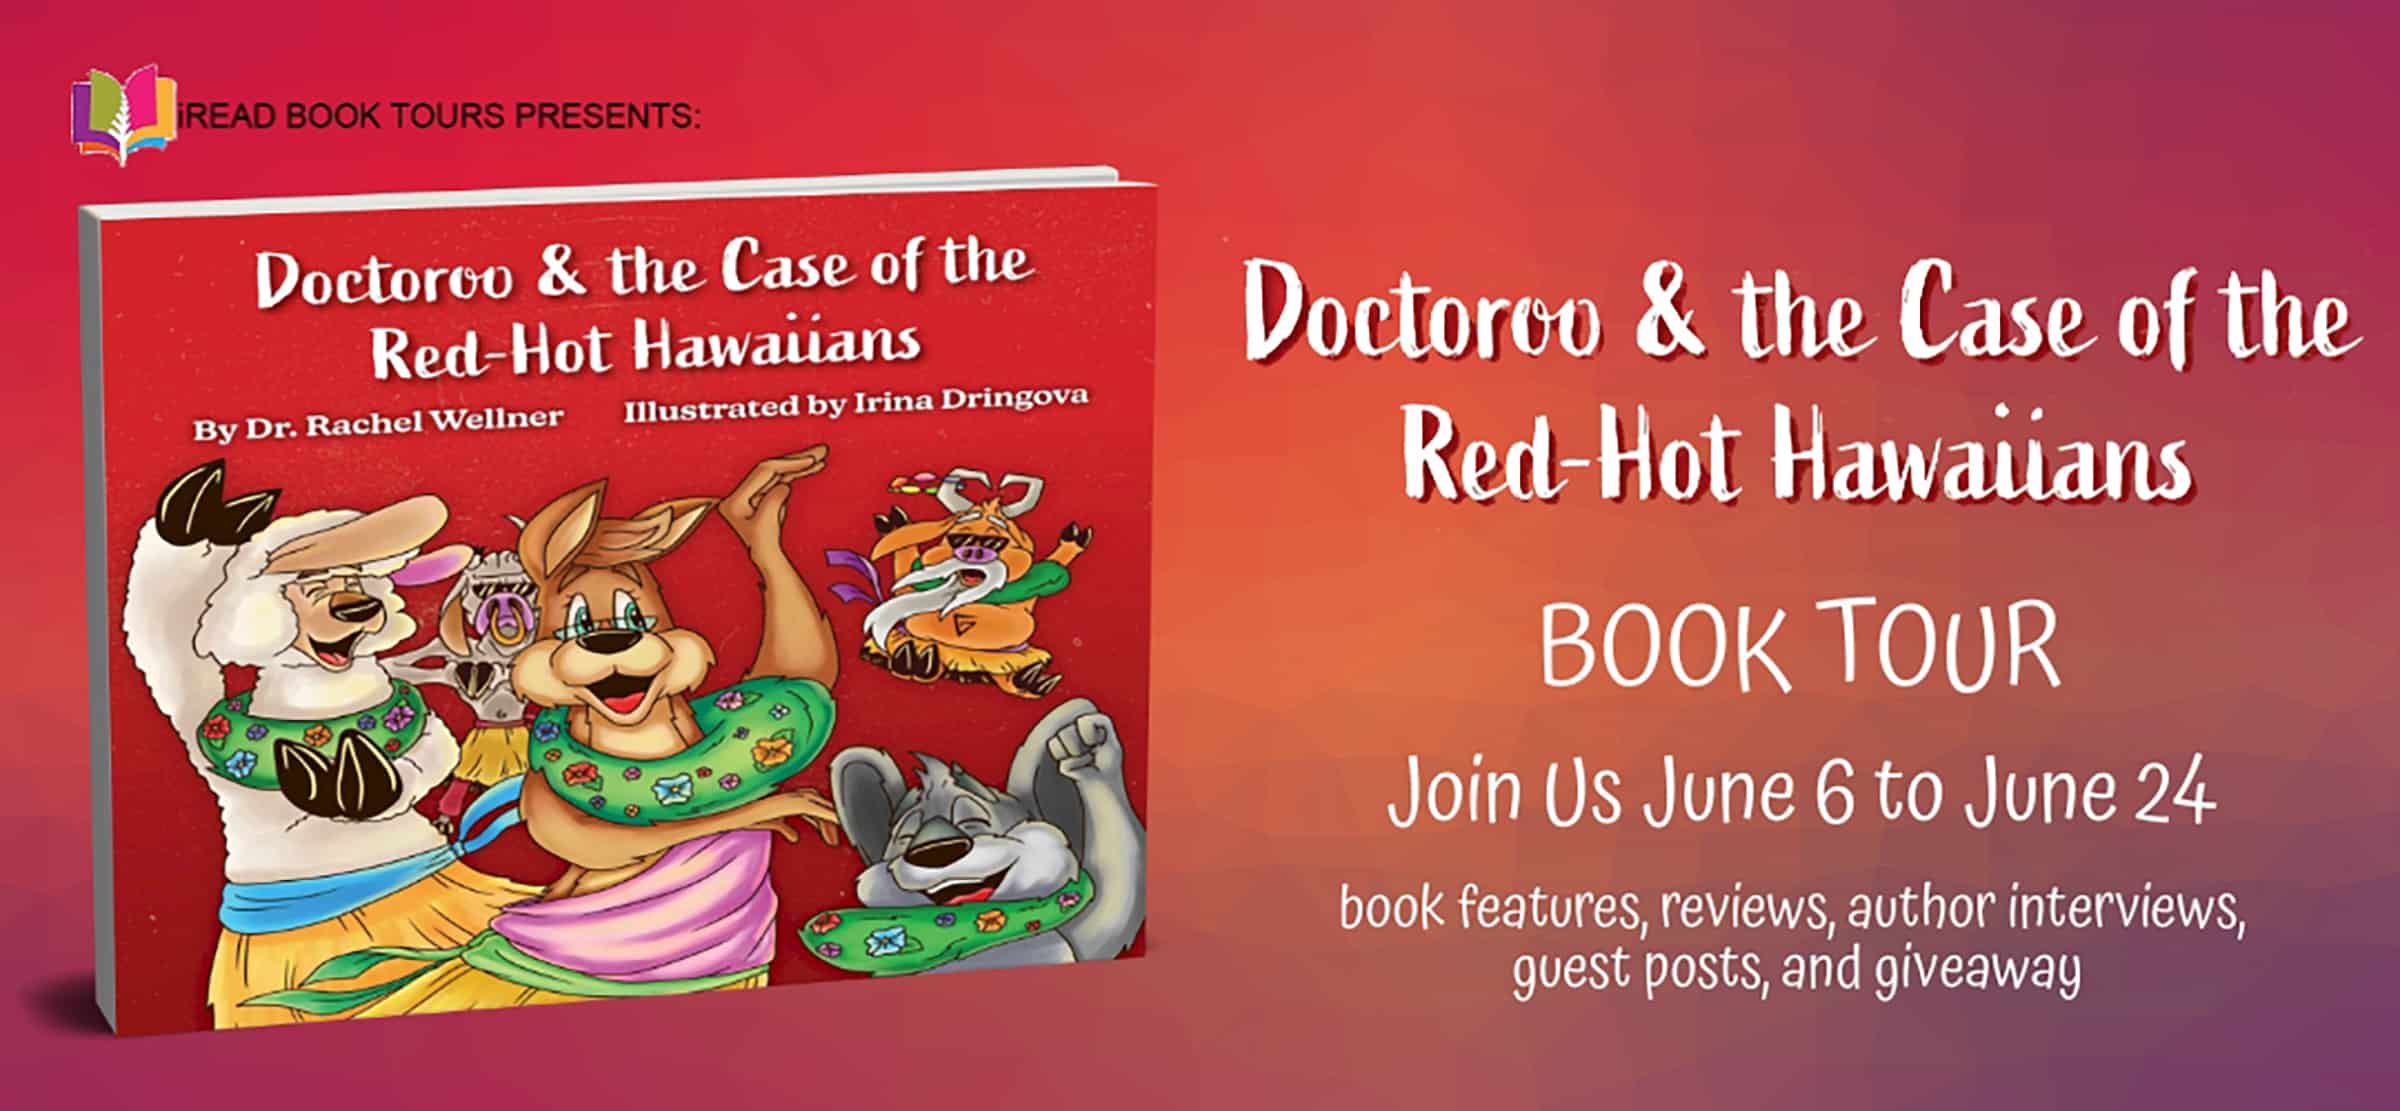 Doctoroo & the Case of the Red Hot Hawaiians by Dr. Rachel Wellner | $50 Sephora Gift Card Giveaway, Author Interview, & Review